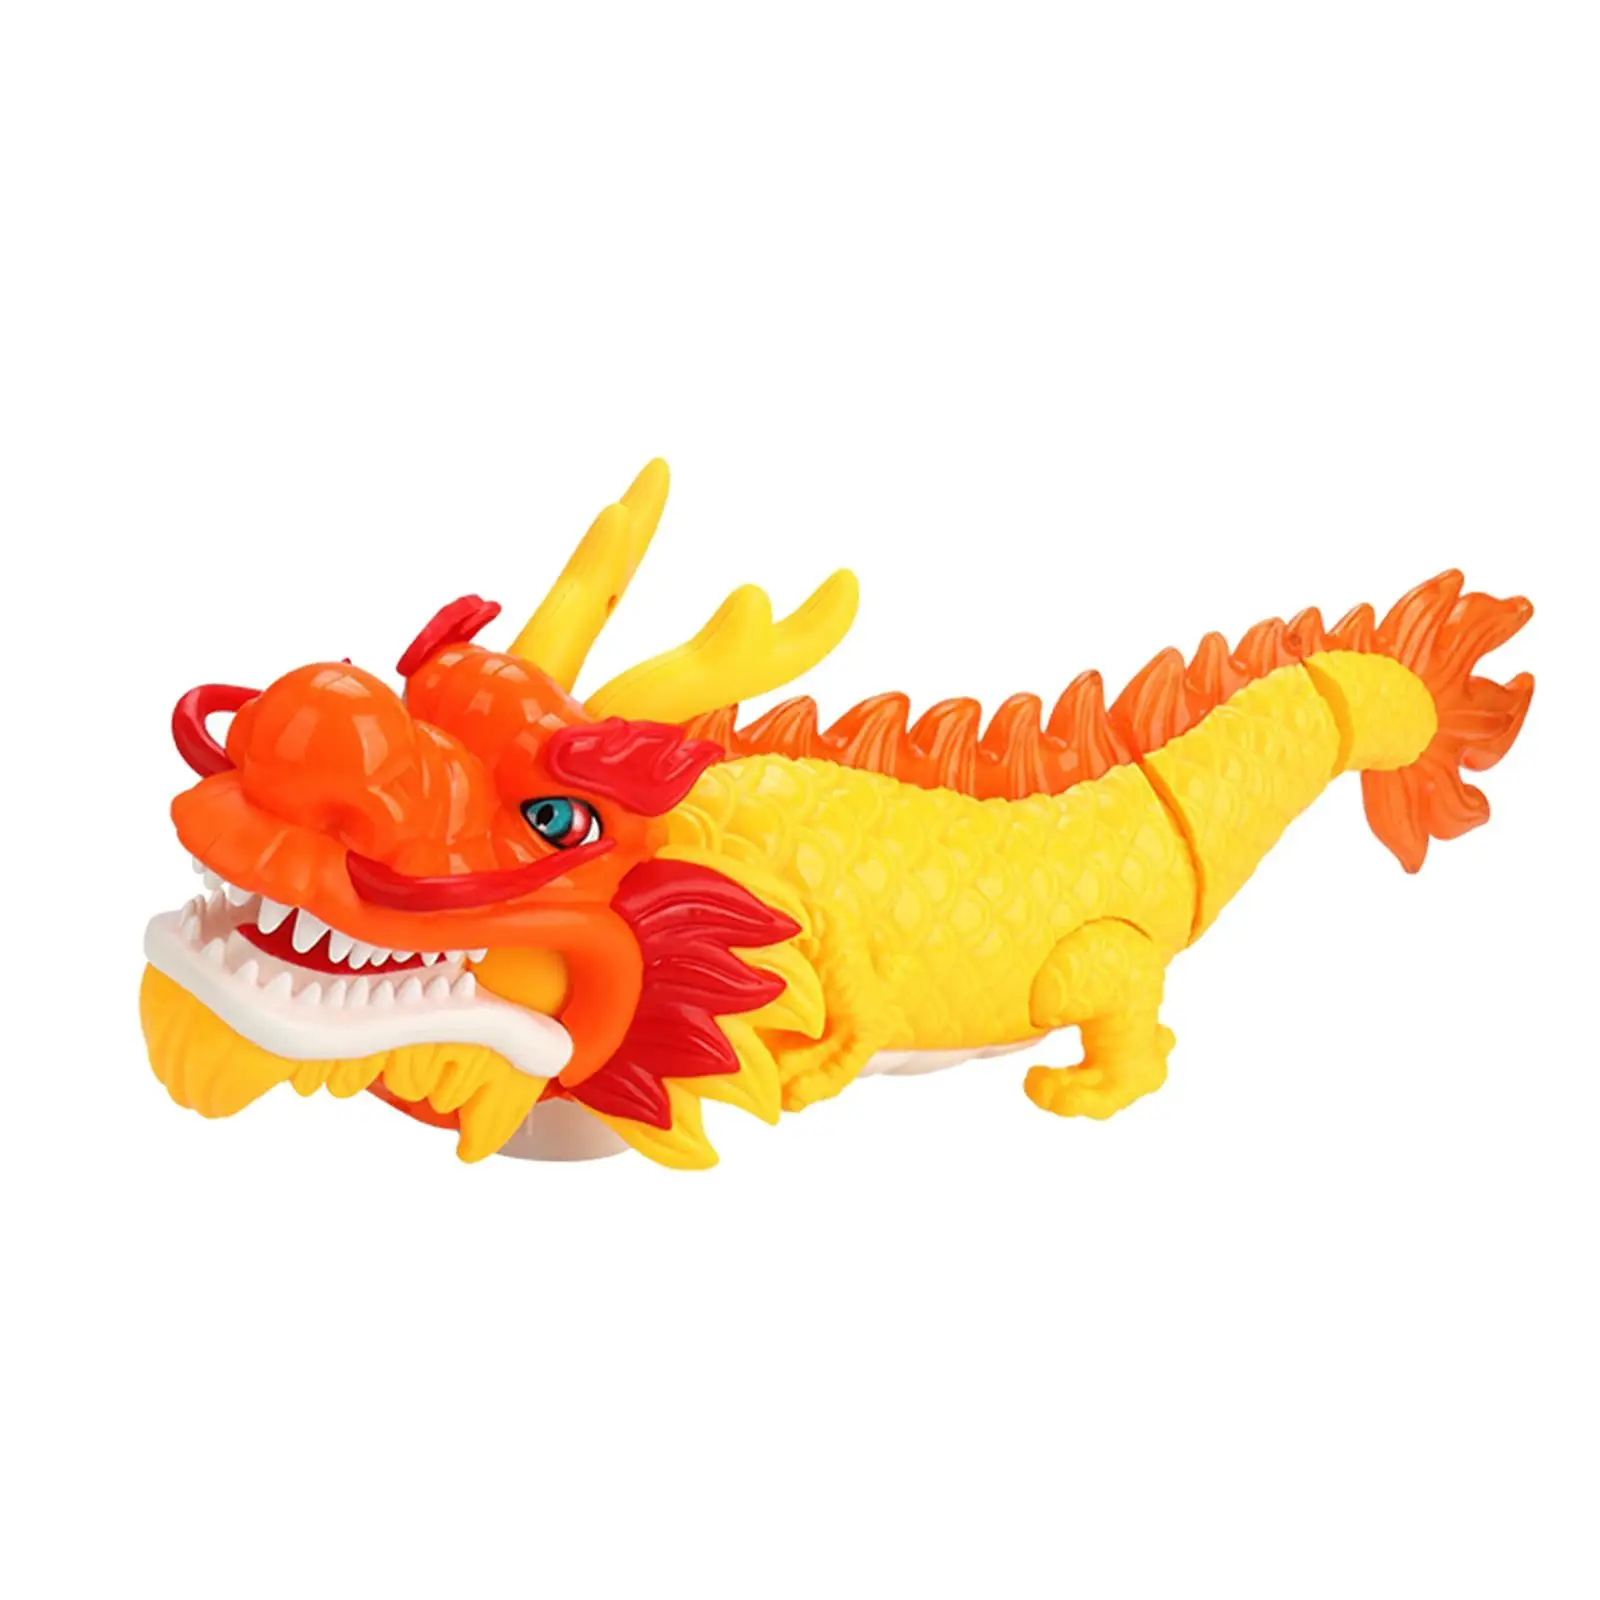 Eletric Dragon Toy Walking High Simulation Novelty Animal Dragon Toy Gifts Crawling Toy for Adults Children Kid Boys Age 8-12